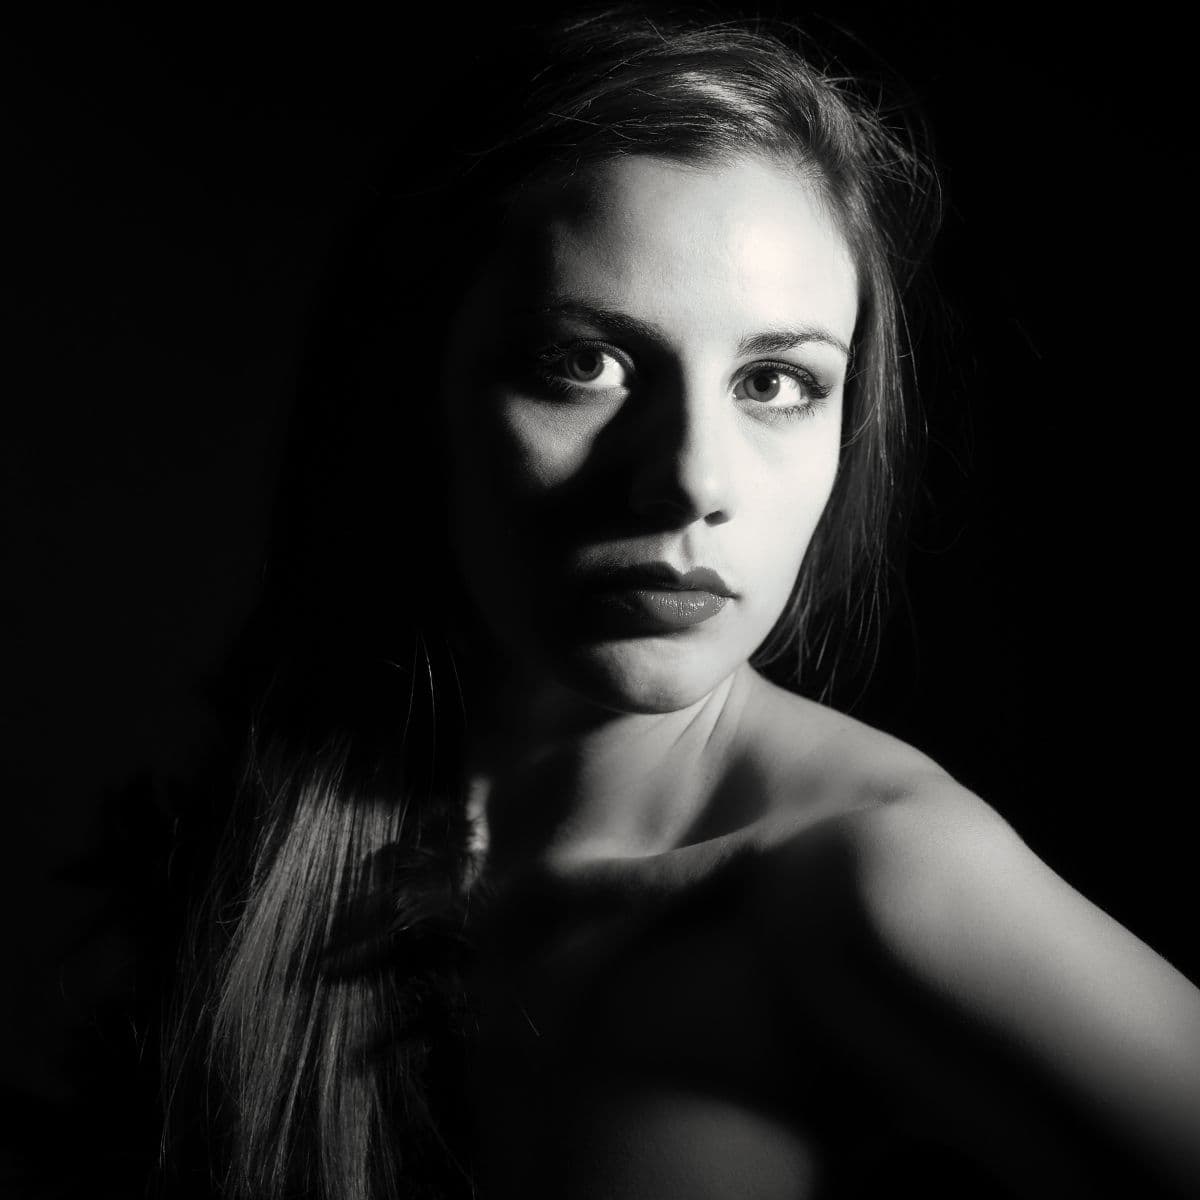 Greyscale portrait of a woman with Rembrandt lighting.